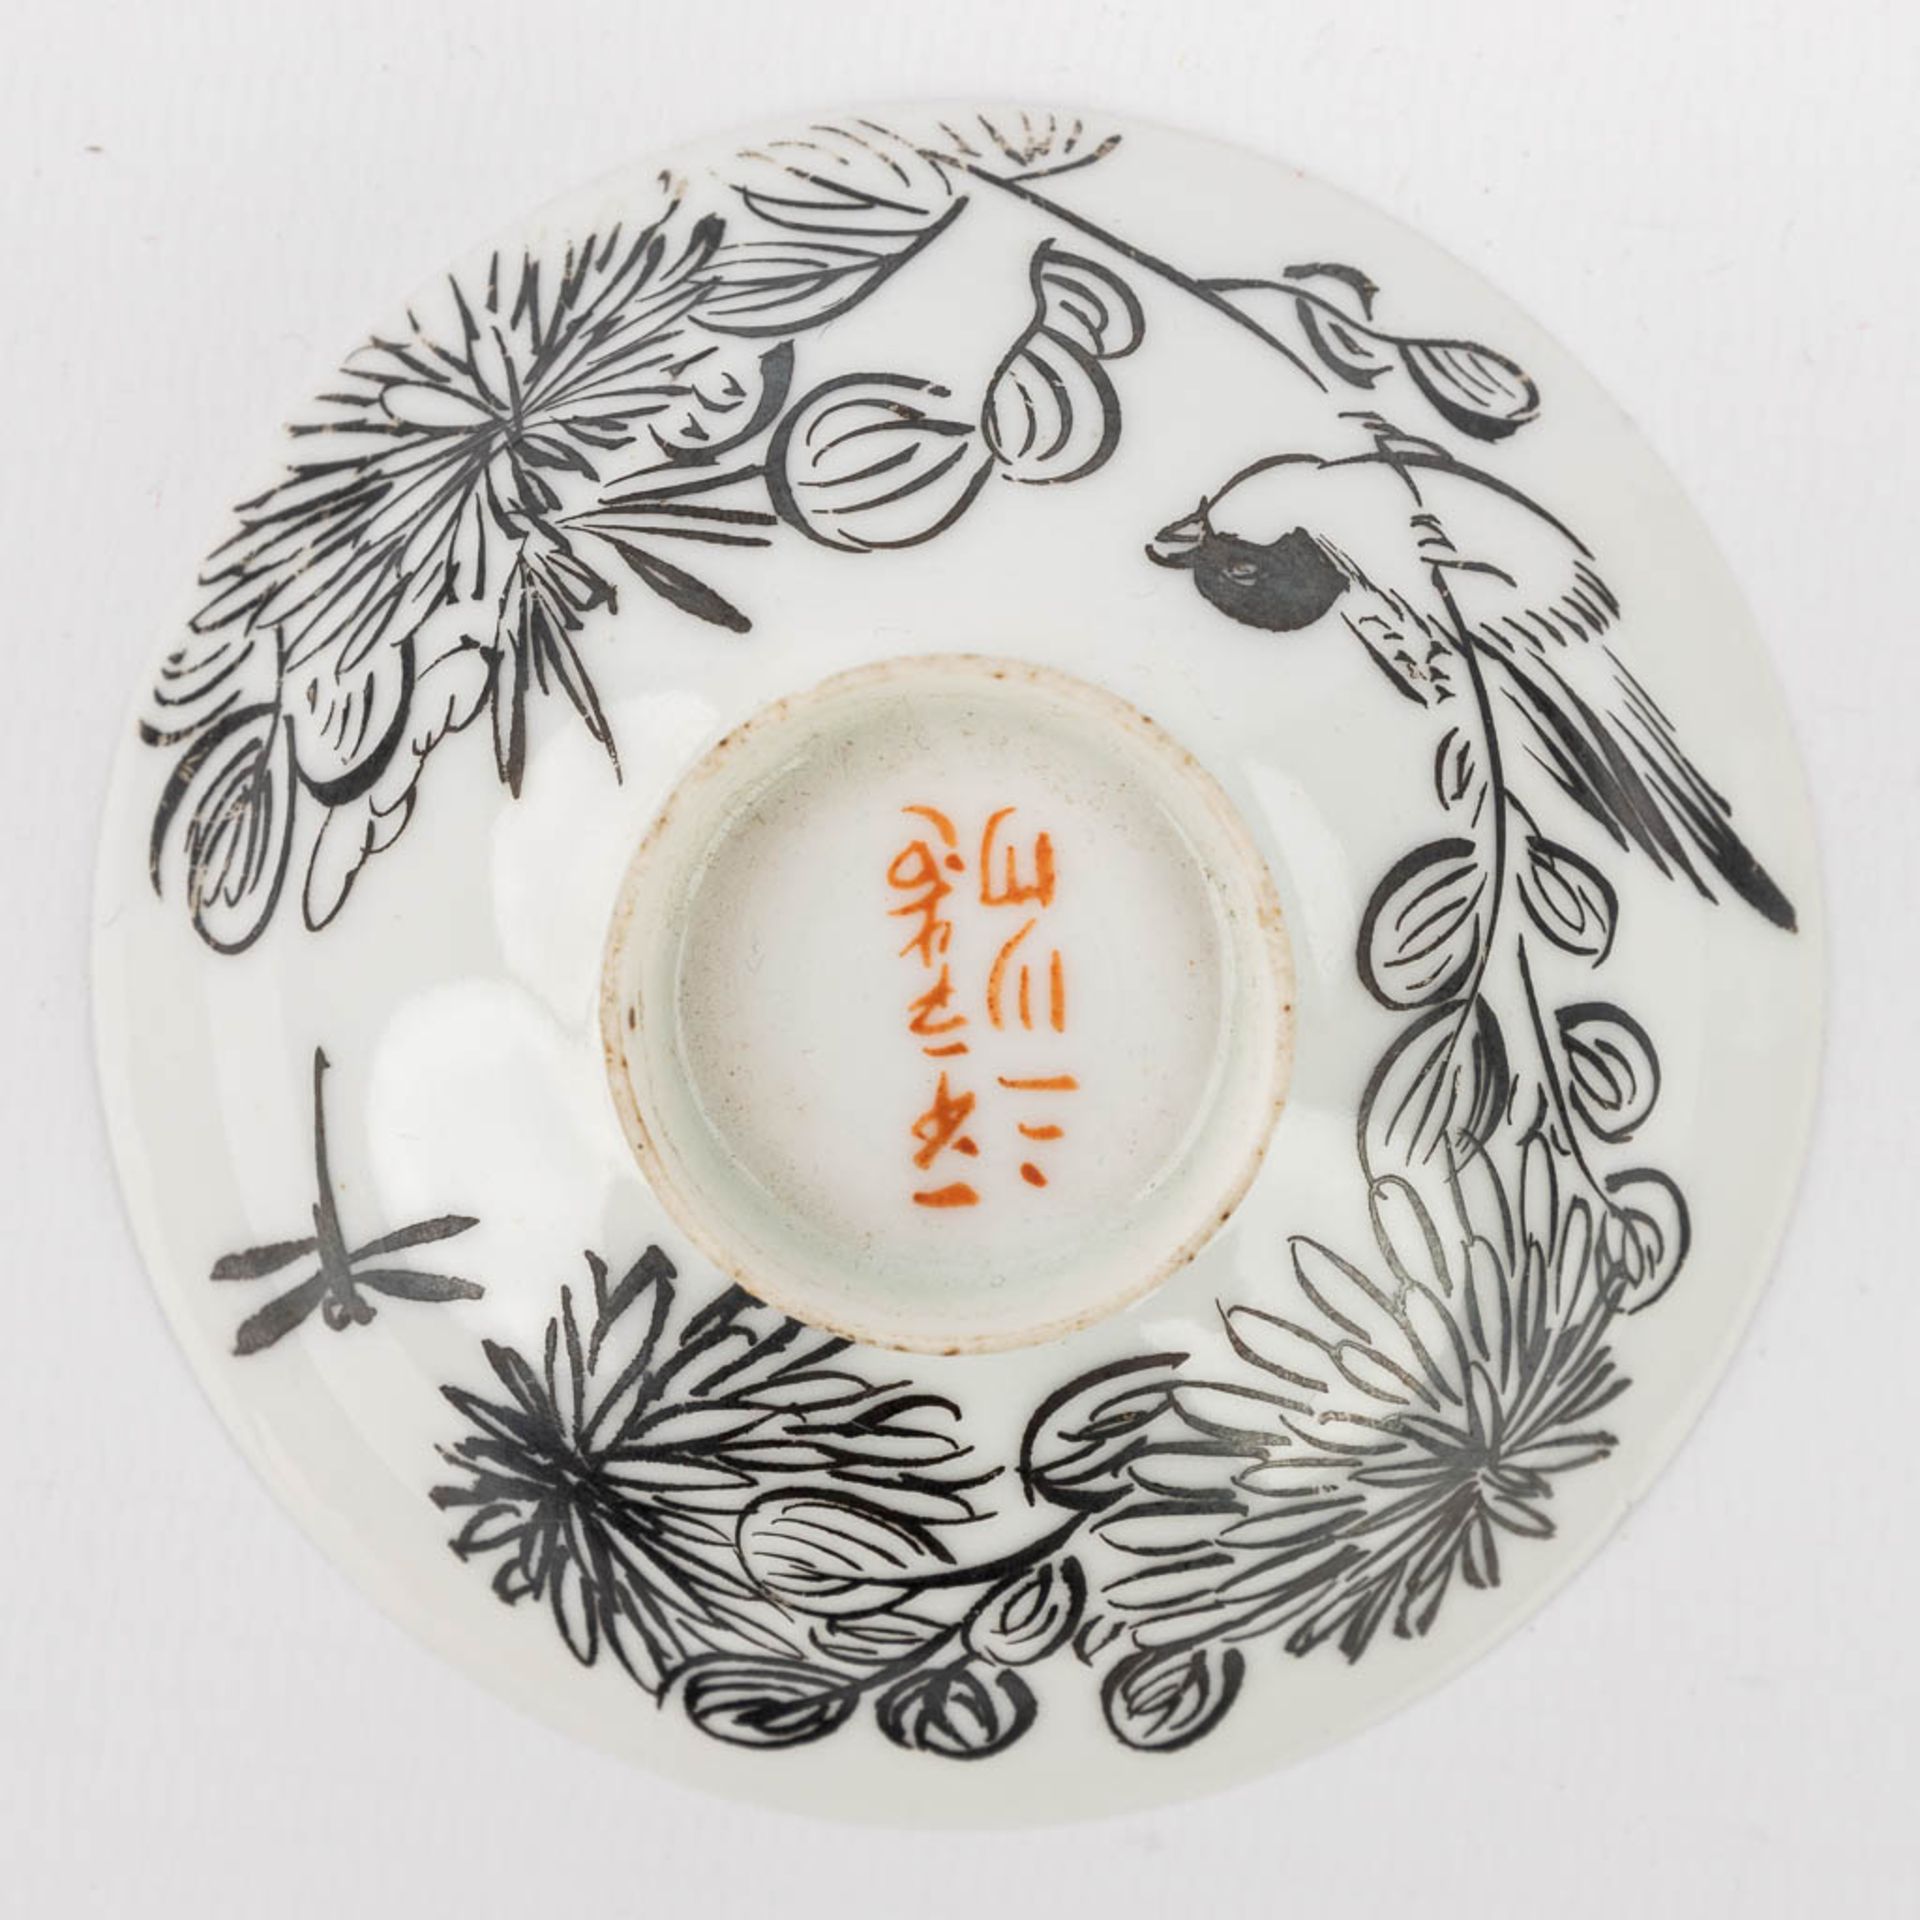 A large collection of bowls and saucers, eggshell porcelain, Japan, 20th C. (H:9 x D:9 cm) - Image 17 of 24